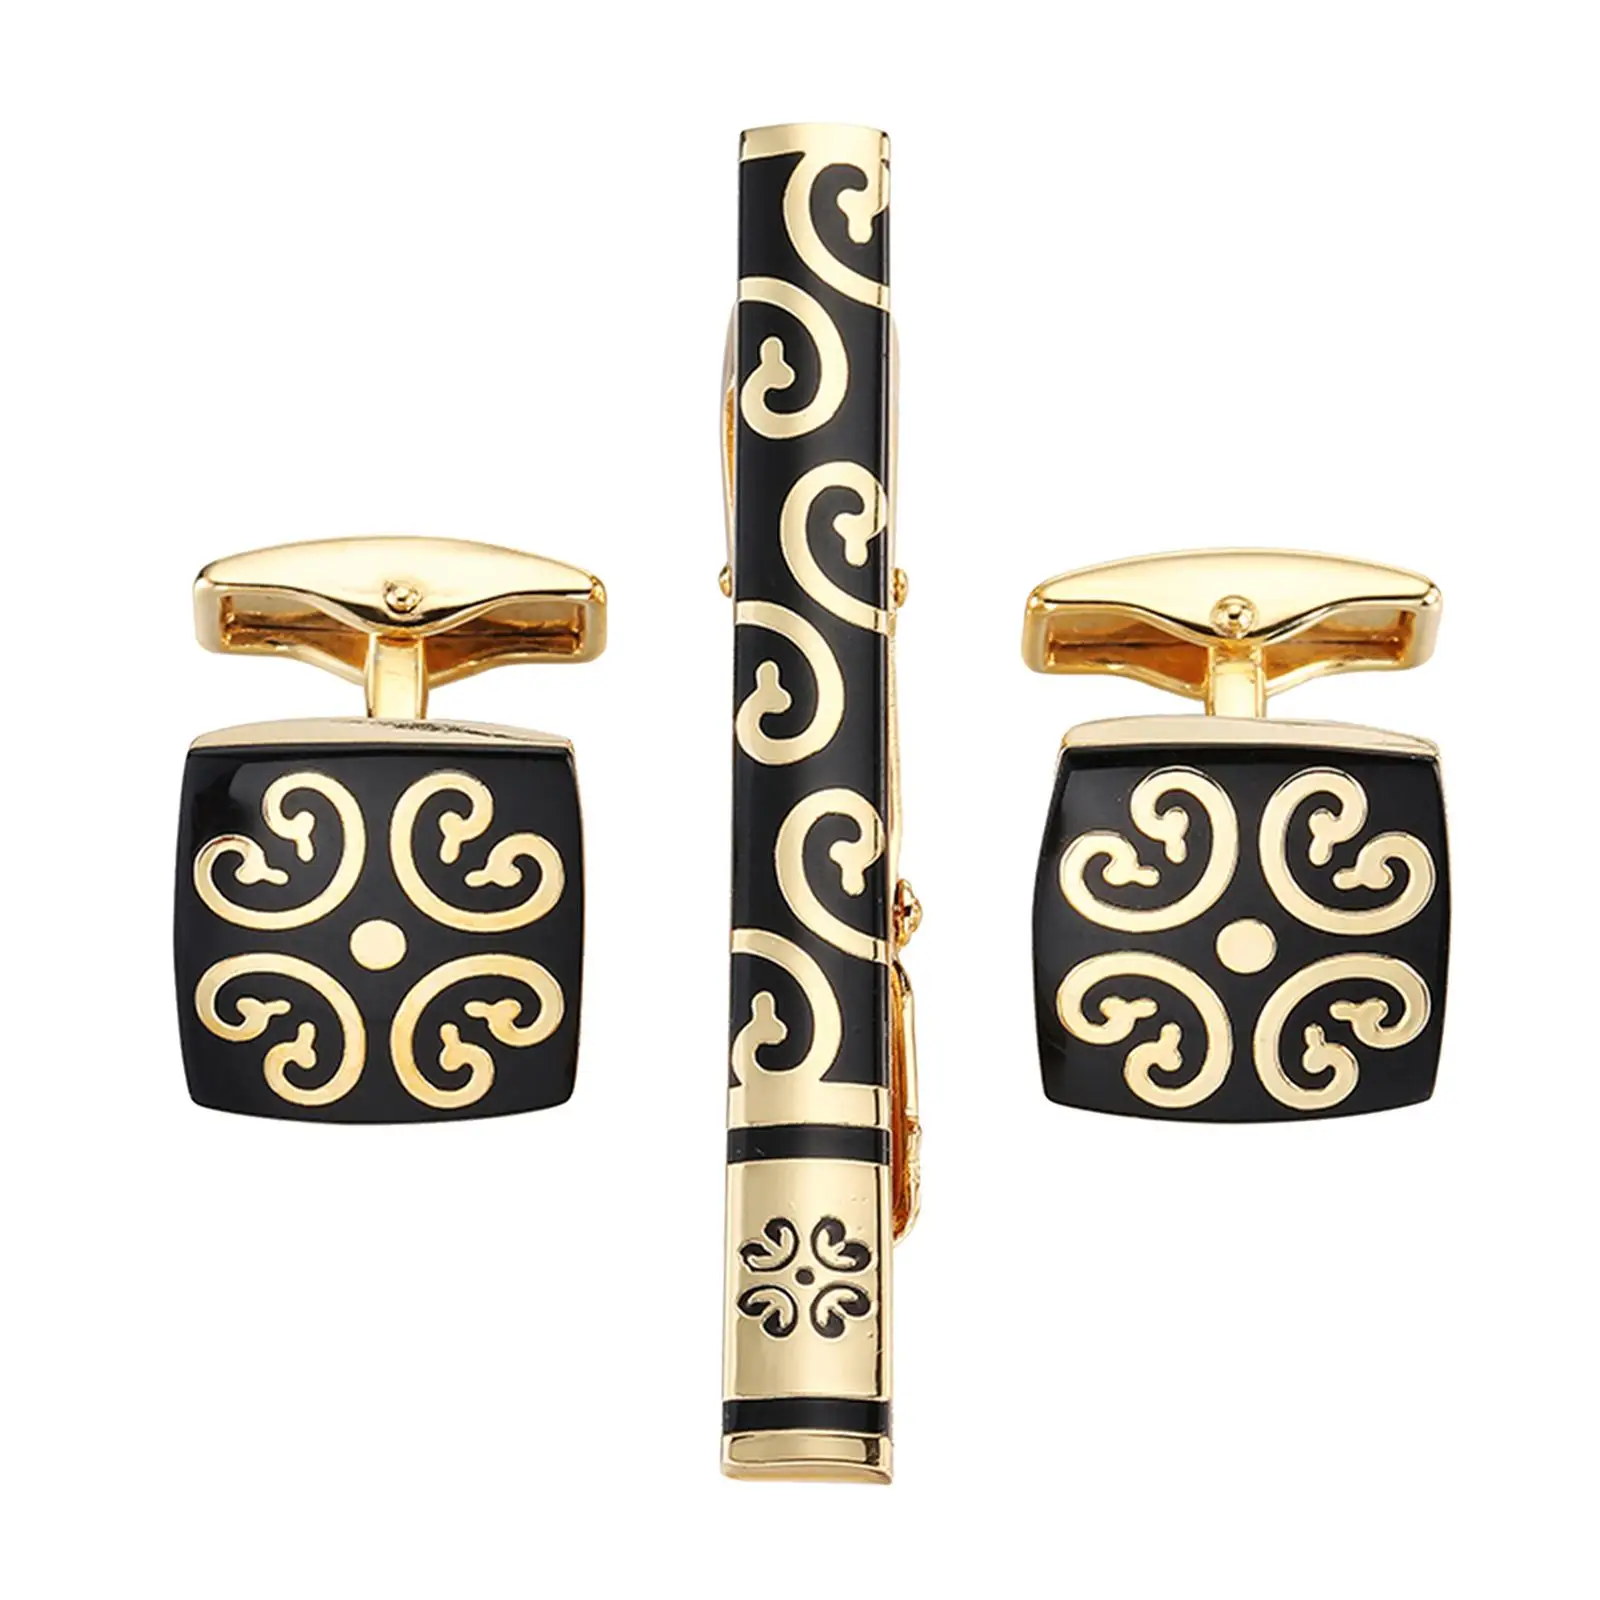 Elegant Menslinks  Pinch Clasp Suit Shirt Tie Clip Clasp Buttons for Tuxedo Wedding Banquet Daily 